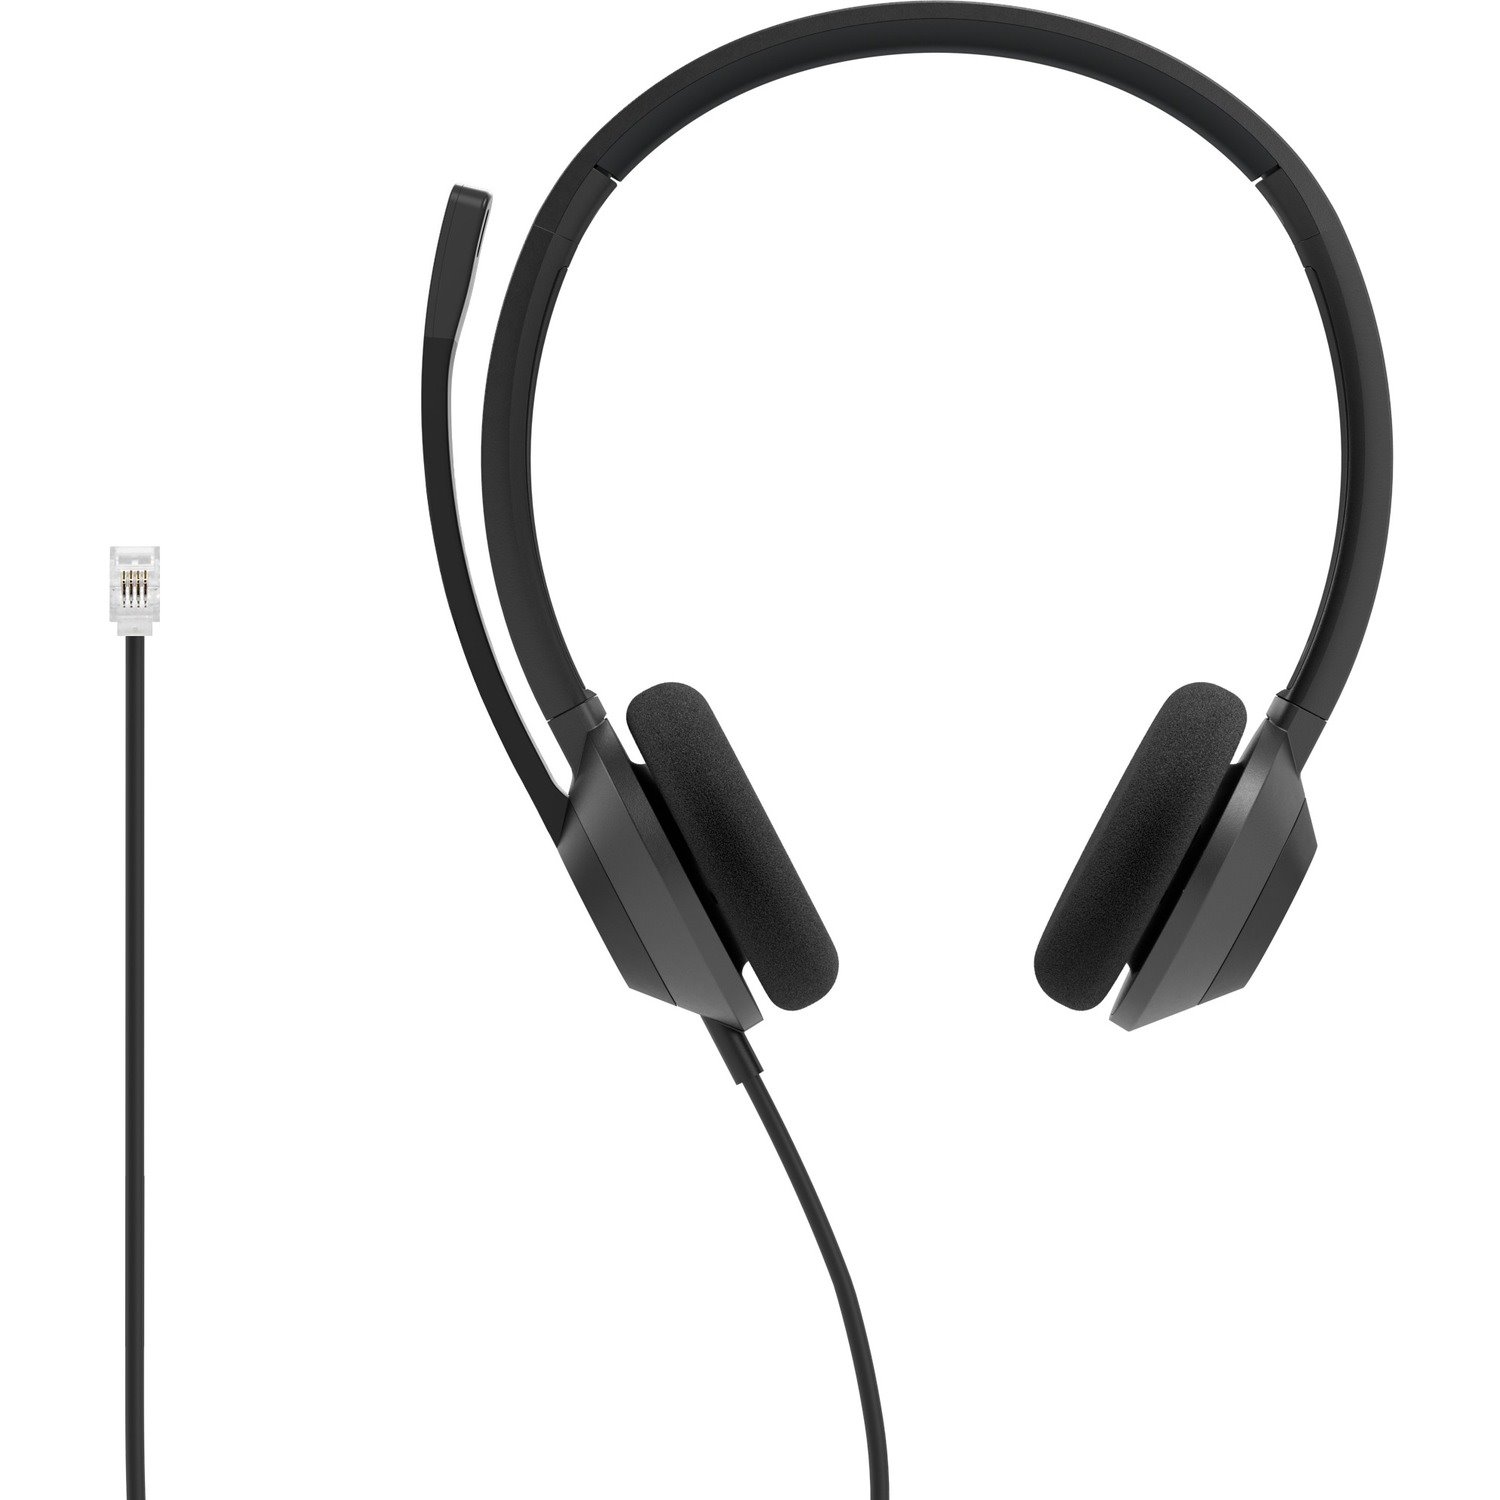 Cisco Headset 322 Wired Dual On-Ear Carbon Black RJ9